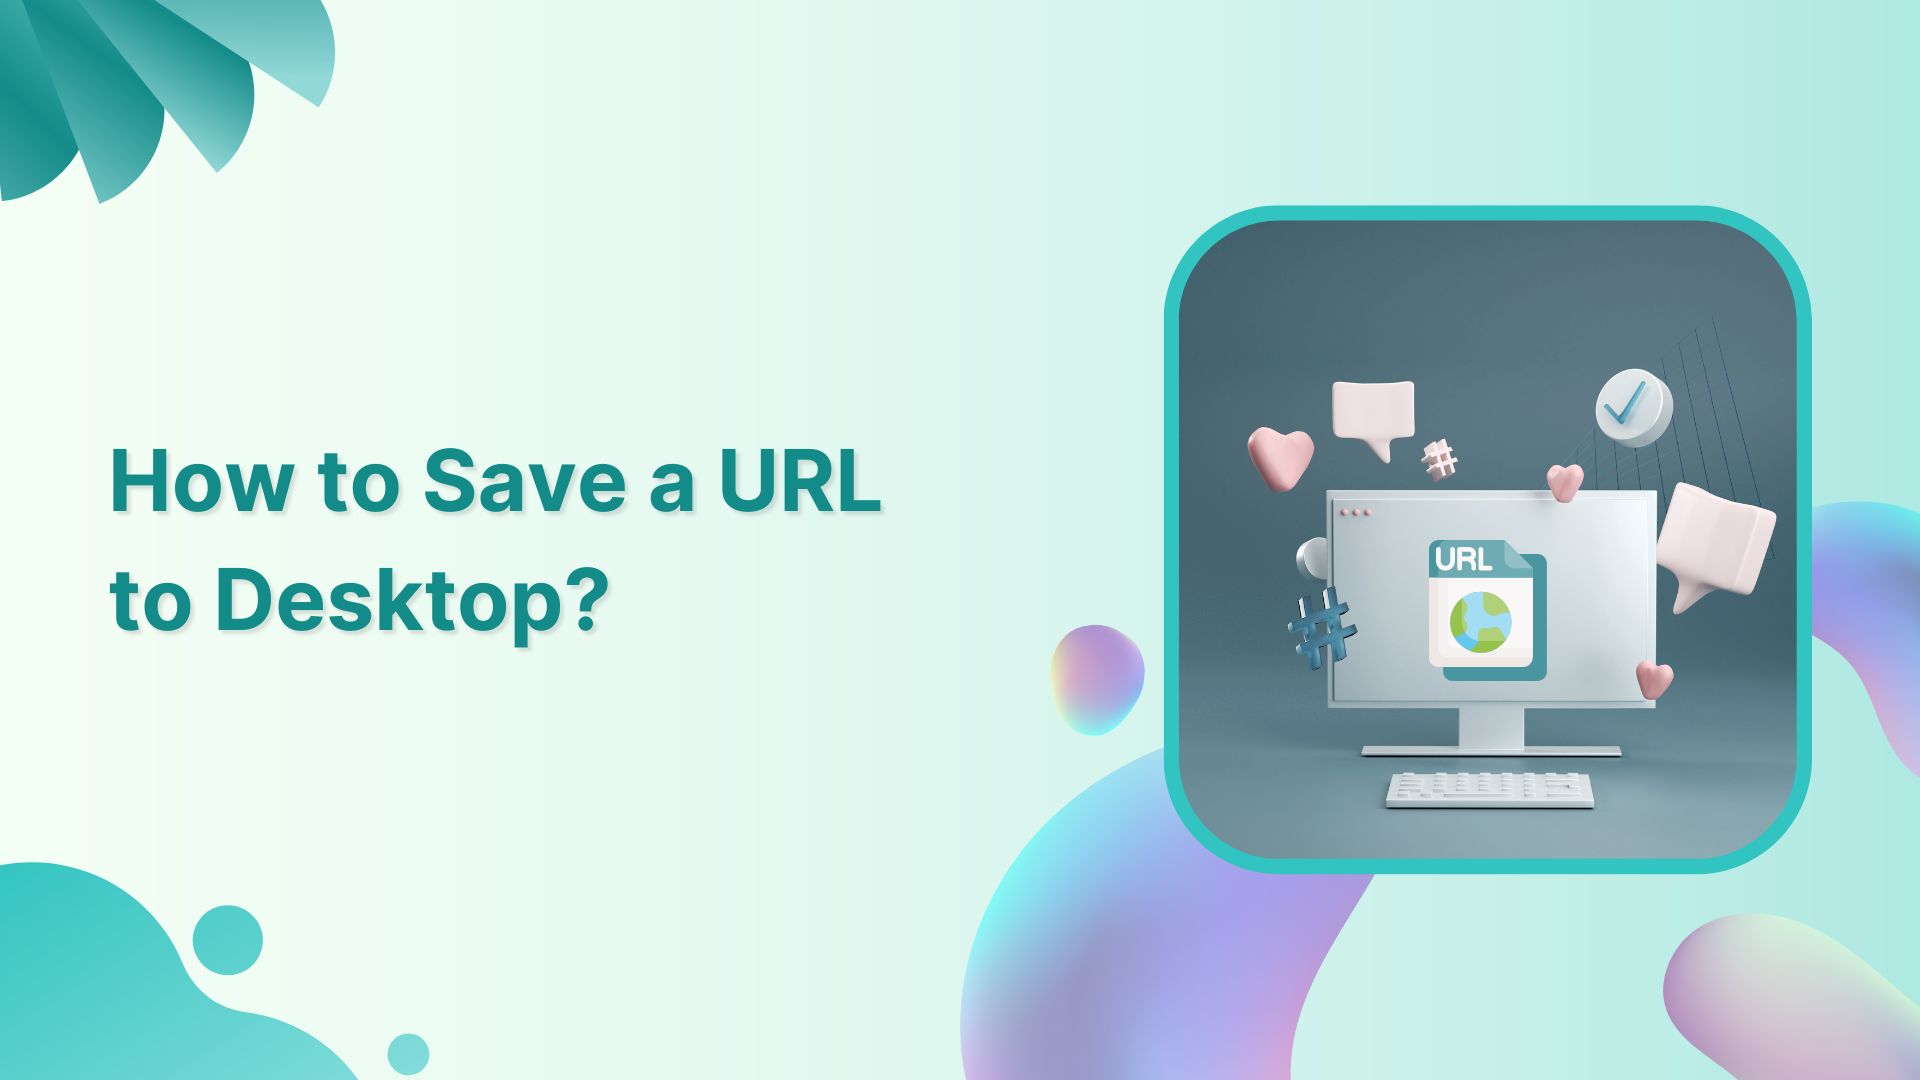 How to Save a URL to Desktop: Step-by-Step Guide